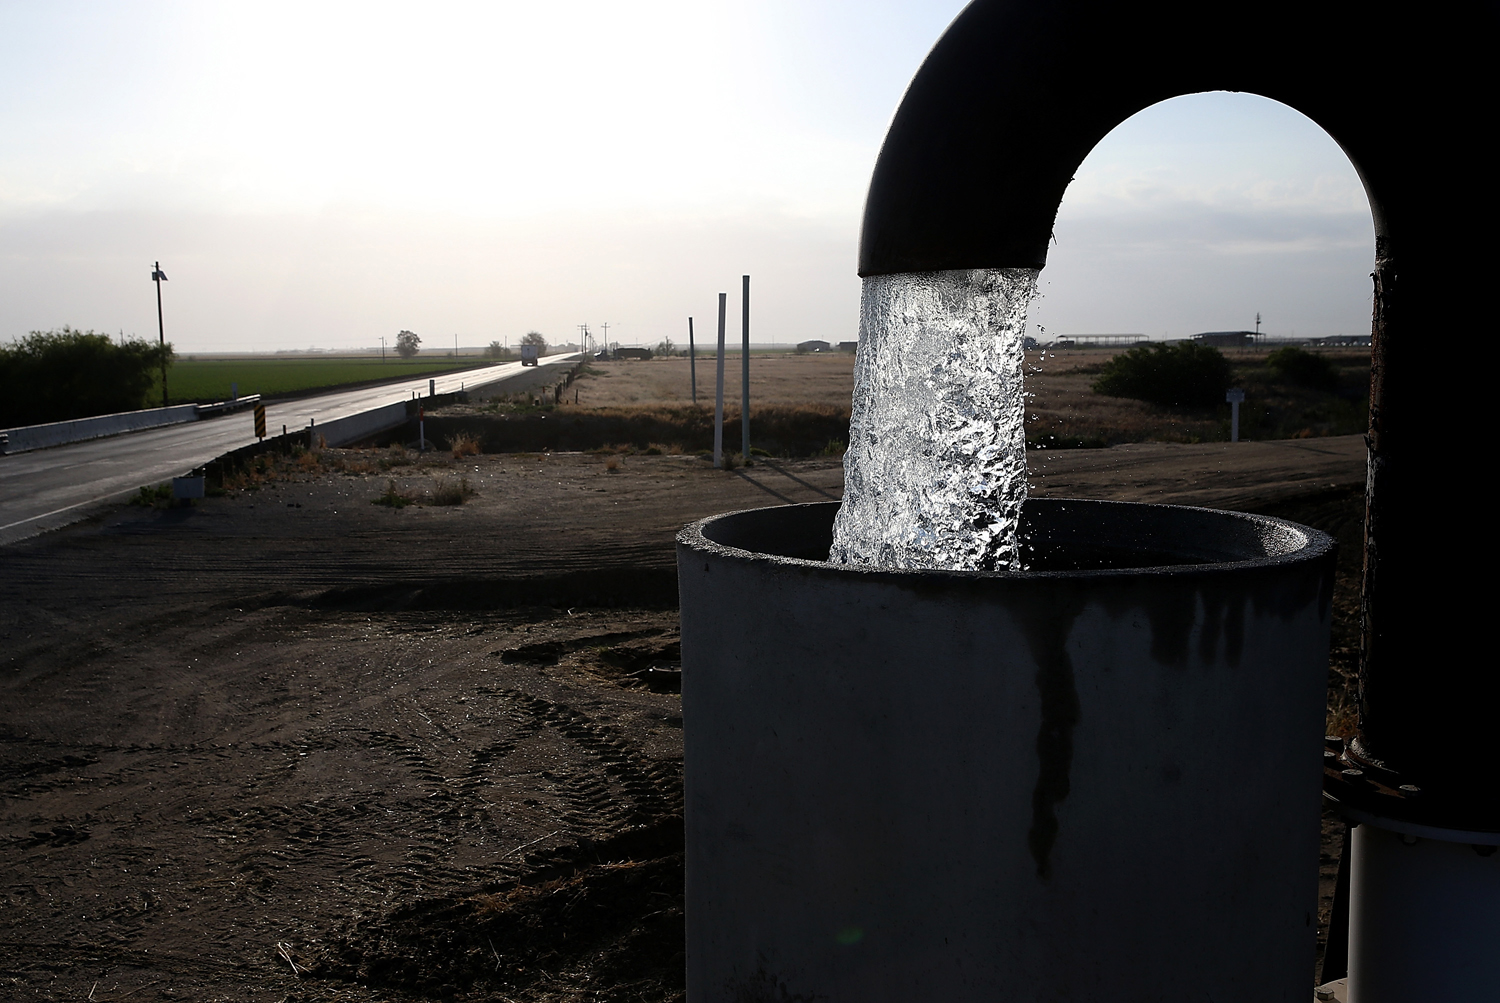 Well water is pumped from the ground on April 24, 2015 in Tulare, California. (Justin Sullivan — Getty Images)